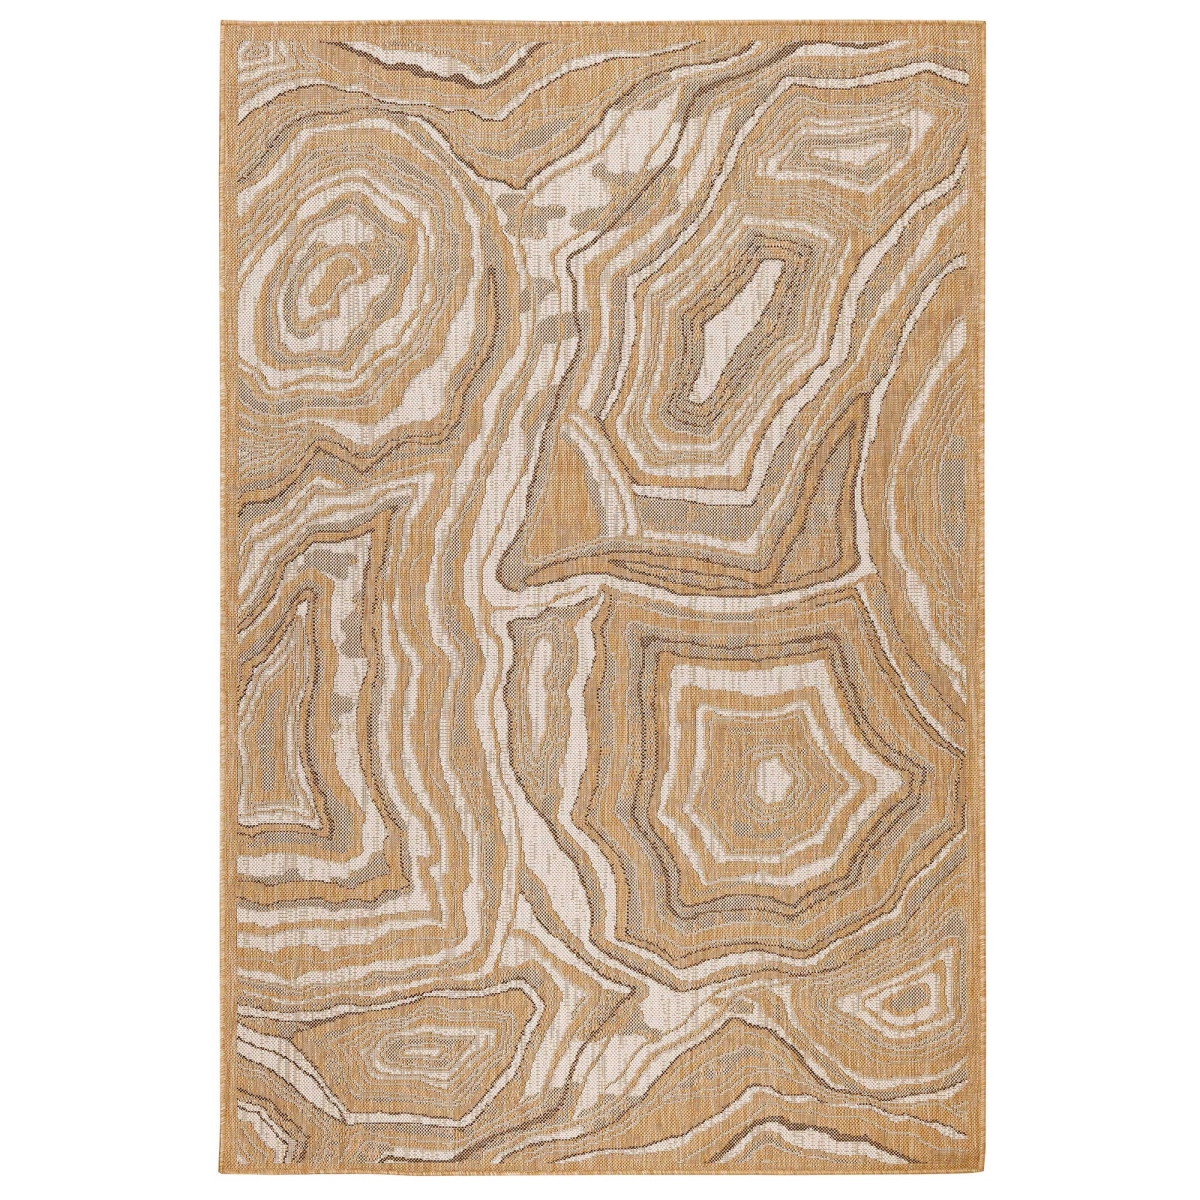 Trans-ocean Imports Cre45841012 39 In. X 59 In. Liora Manne Carmel Agate Indoor & Outdoor Wilton Woven Rectangle Rug - Sand